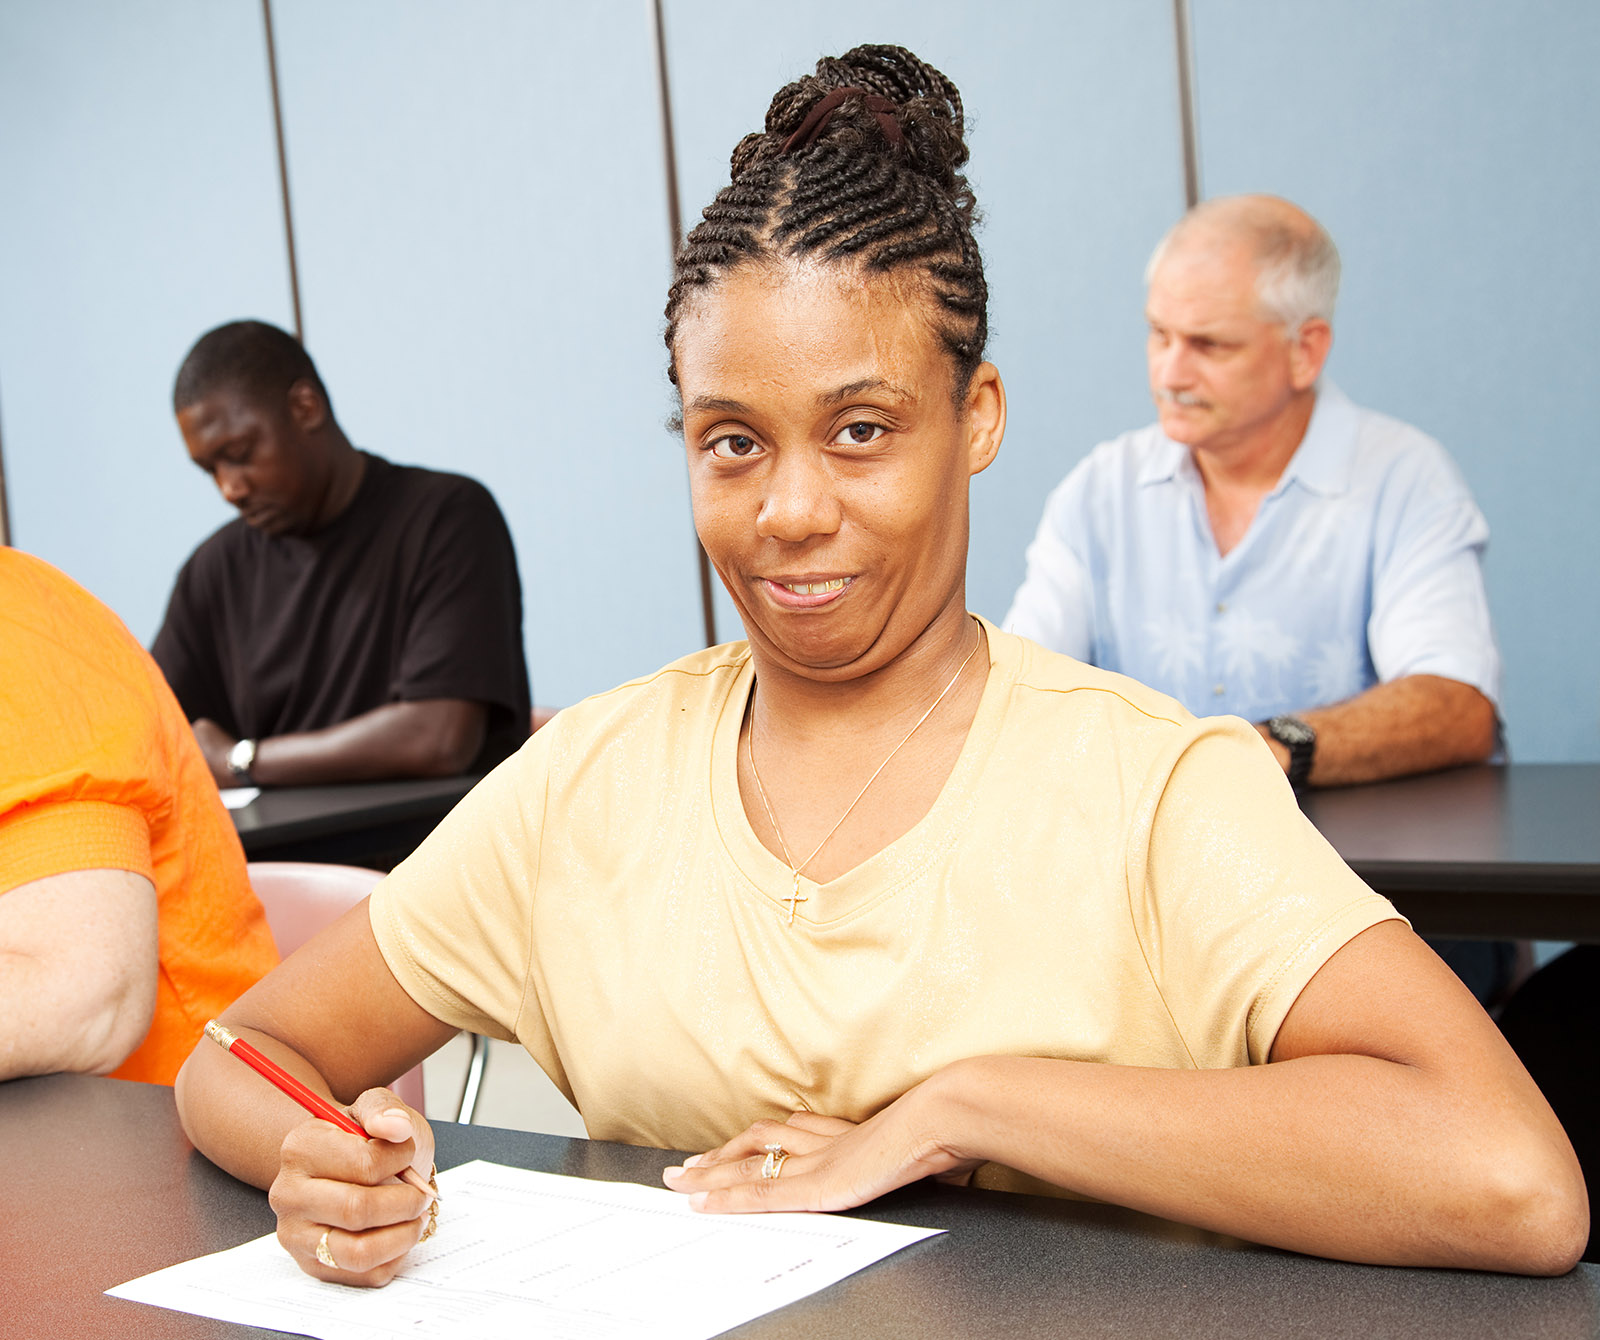 An African-American woman in a yellow t-shirt sits at a table while taking notes on a piece of paper.